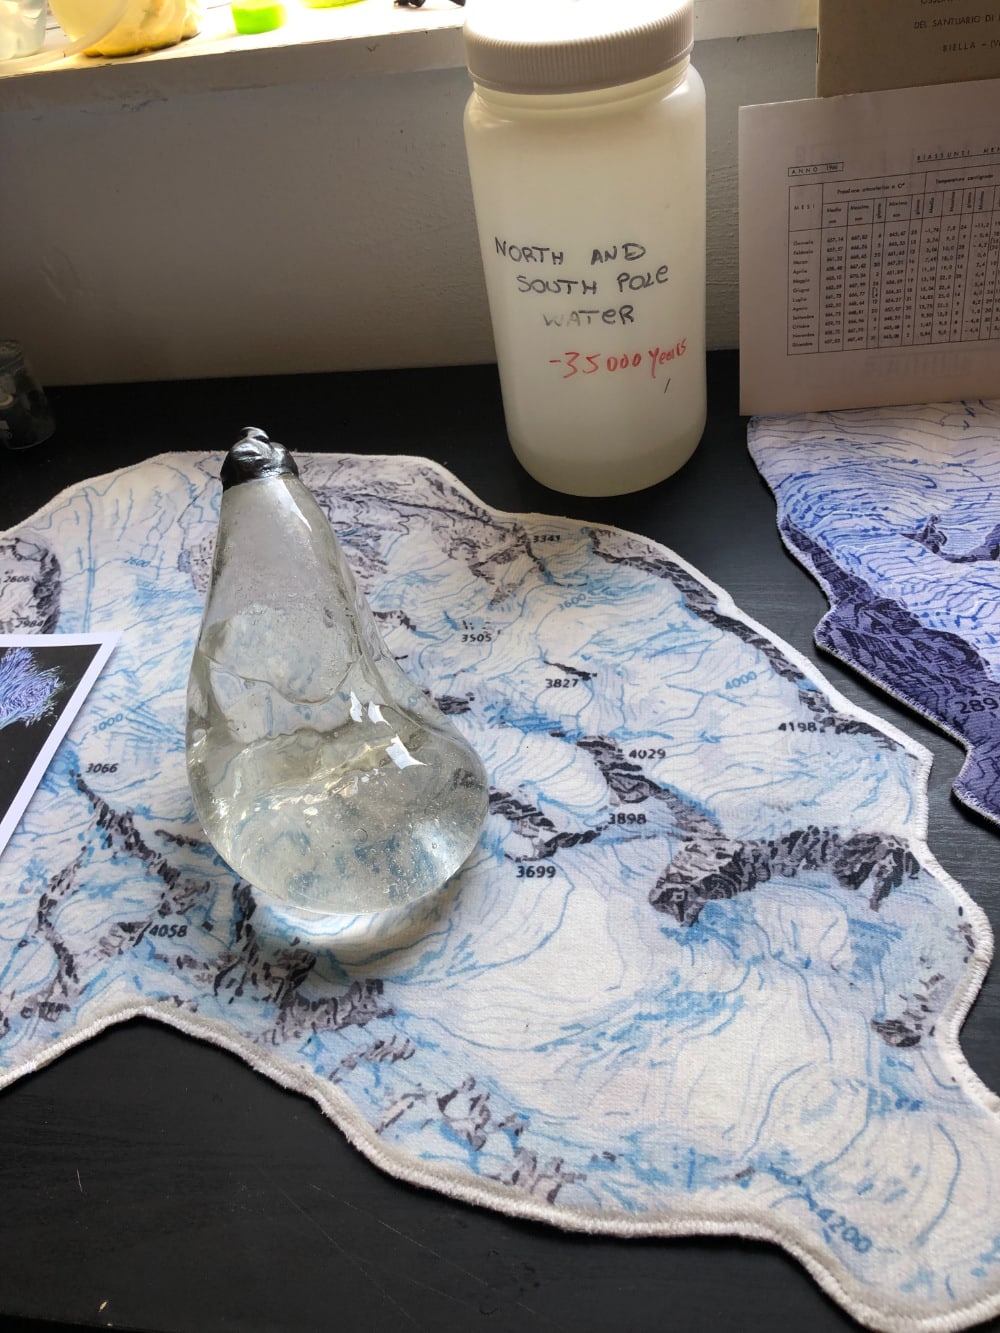 a table with a glass object, a map and a plastic container with the words "North and South Pole water - 35000 years" written on it